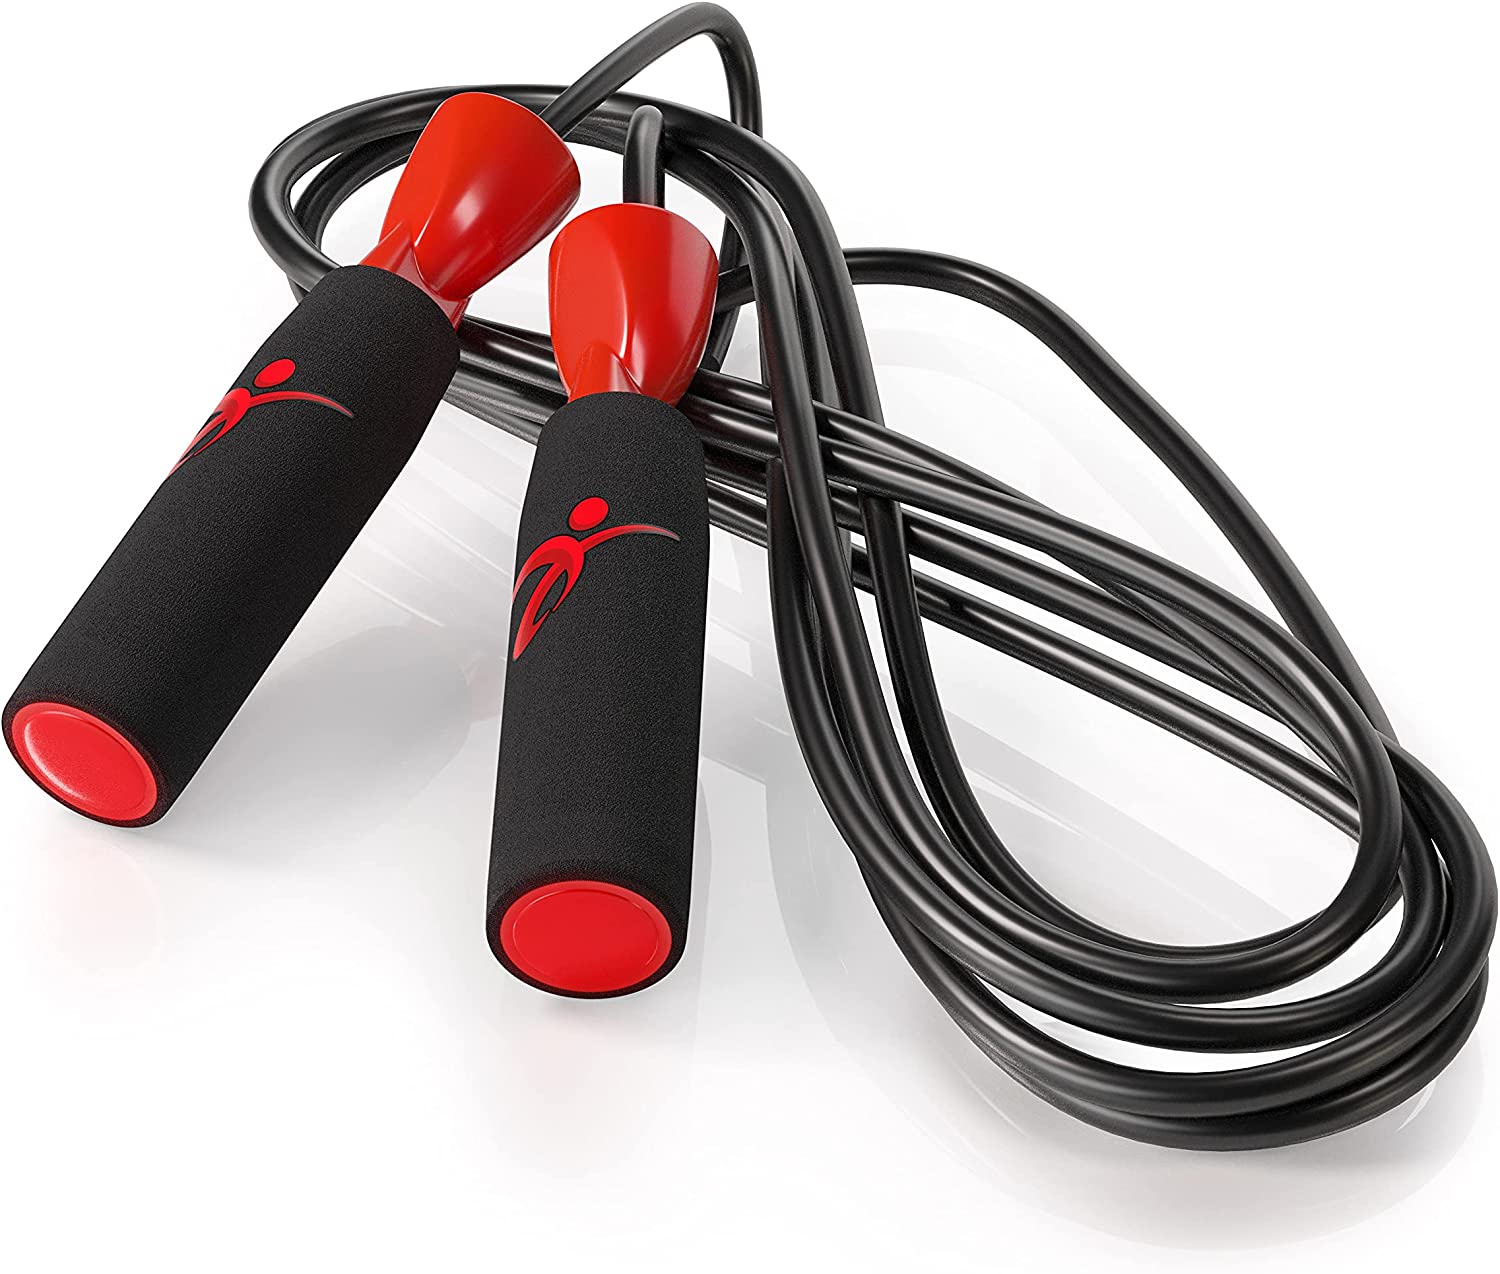 Fitness Factor Jump Rope with Adjustable Length, Tangle-Free Skipping Rope for Gym Workout,Crossfit, Fitness Exercise, WOD, Boxing, MMA, Endurance Training Include Carrying Pouch (Red)